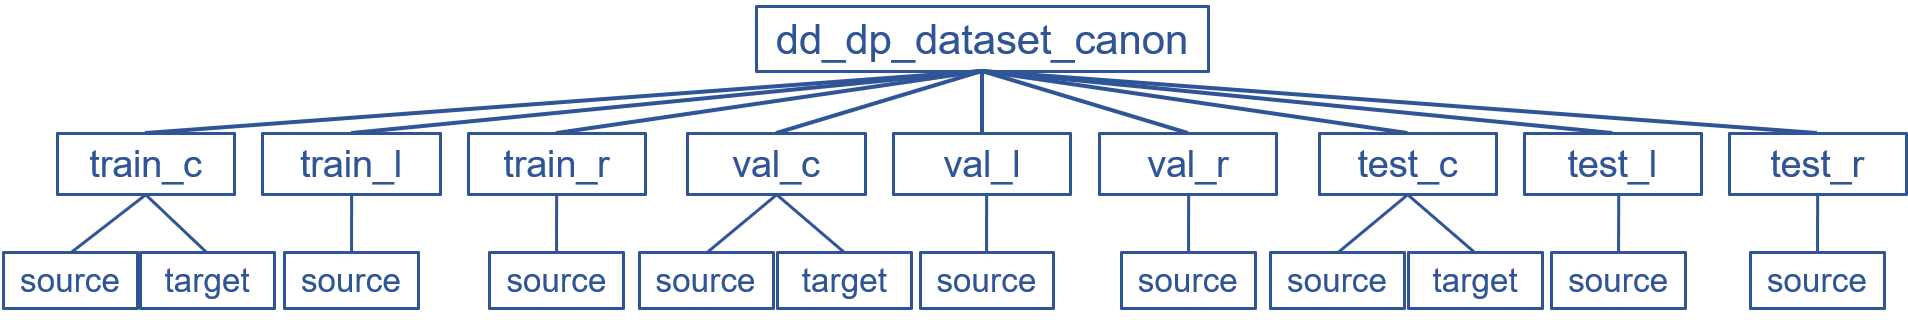 dataset_structure.png